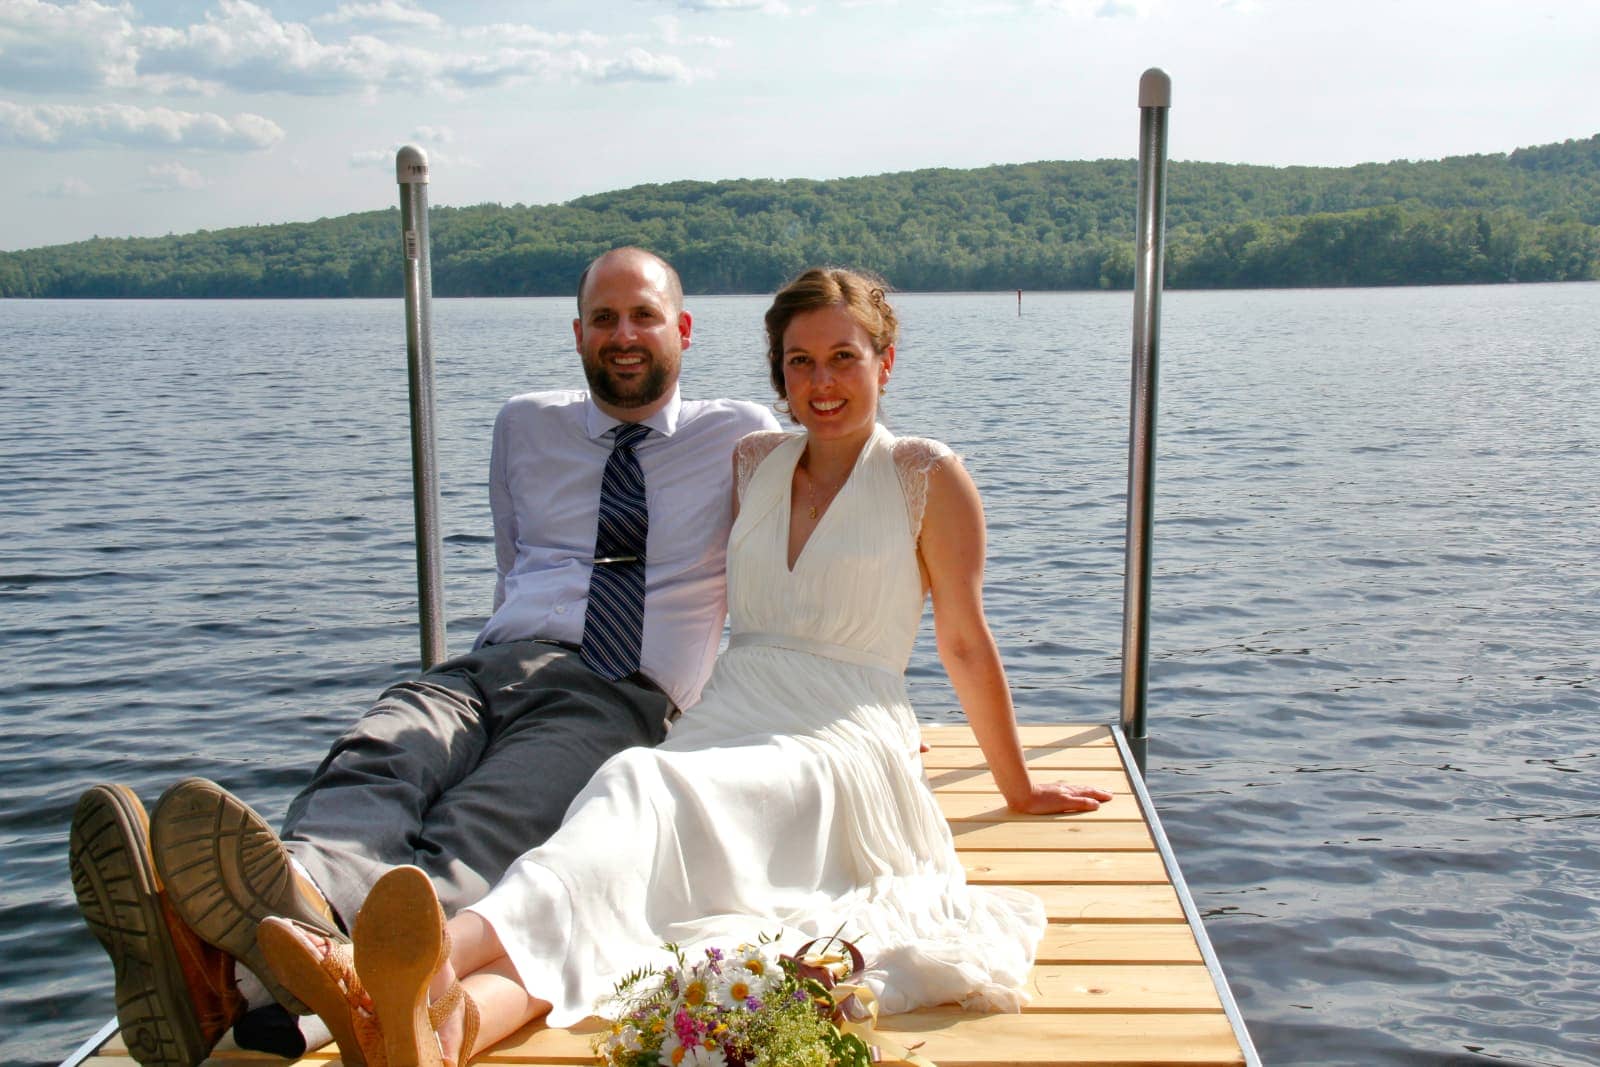 Man and woman in wedding clothes sitting on jetty